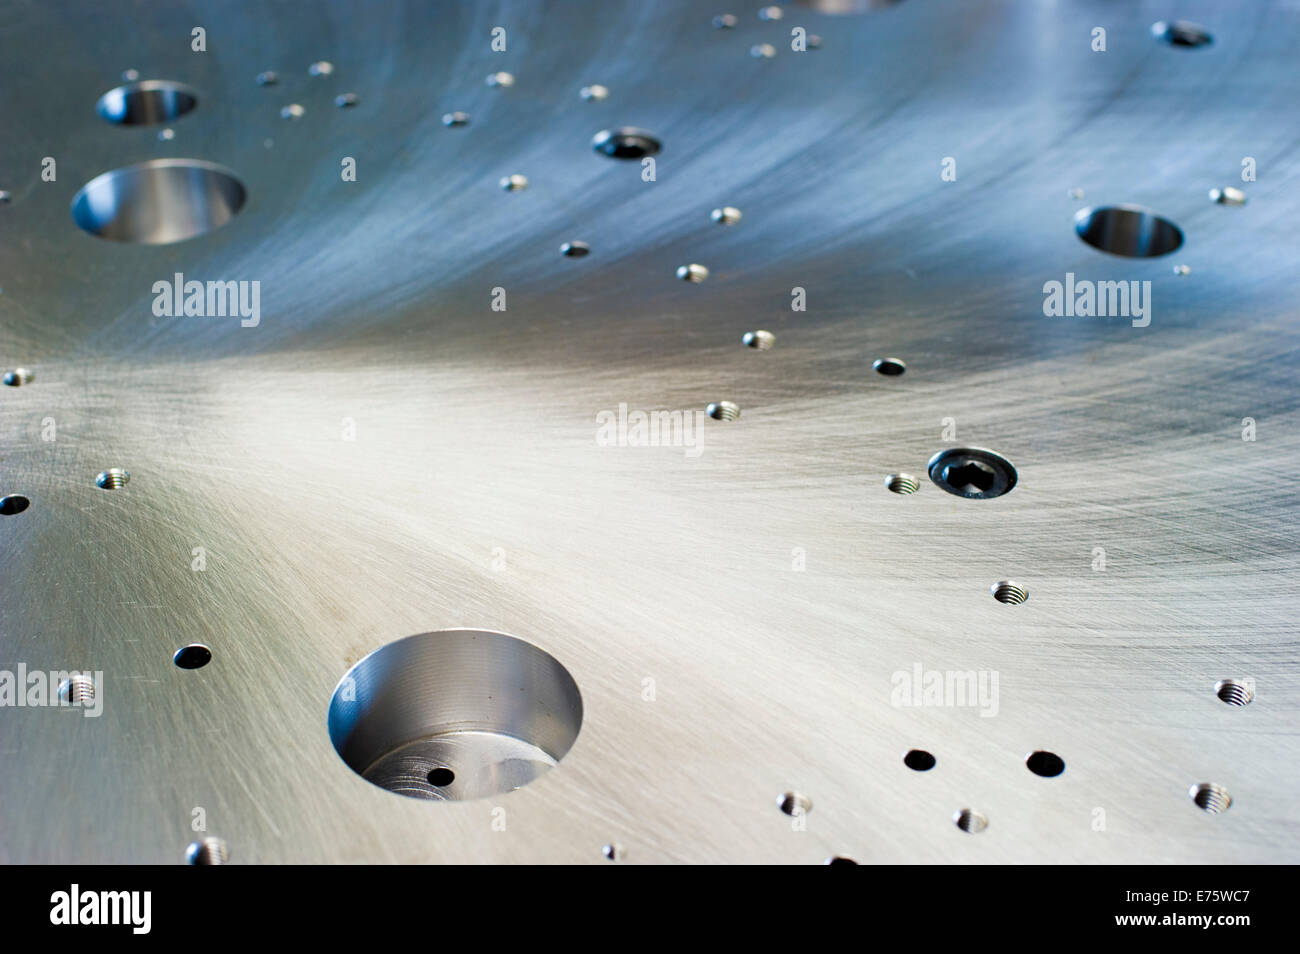 Cut metal surface with drilled holes Stock Photo